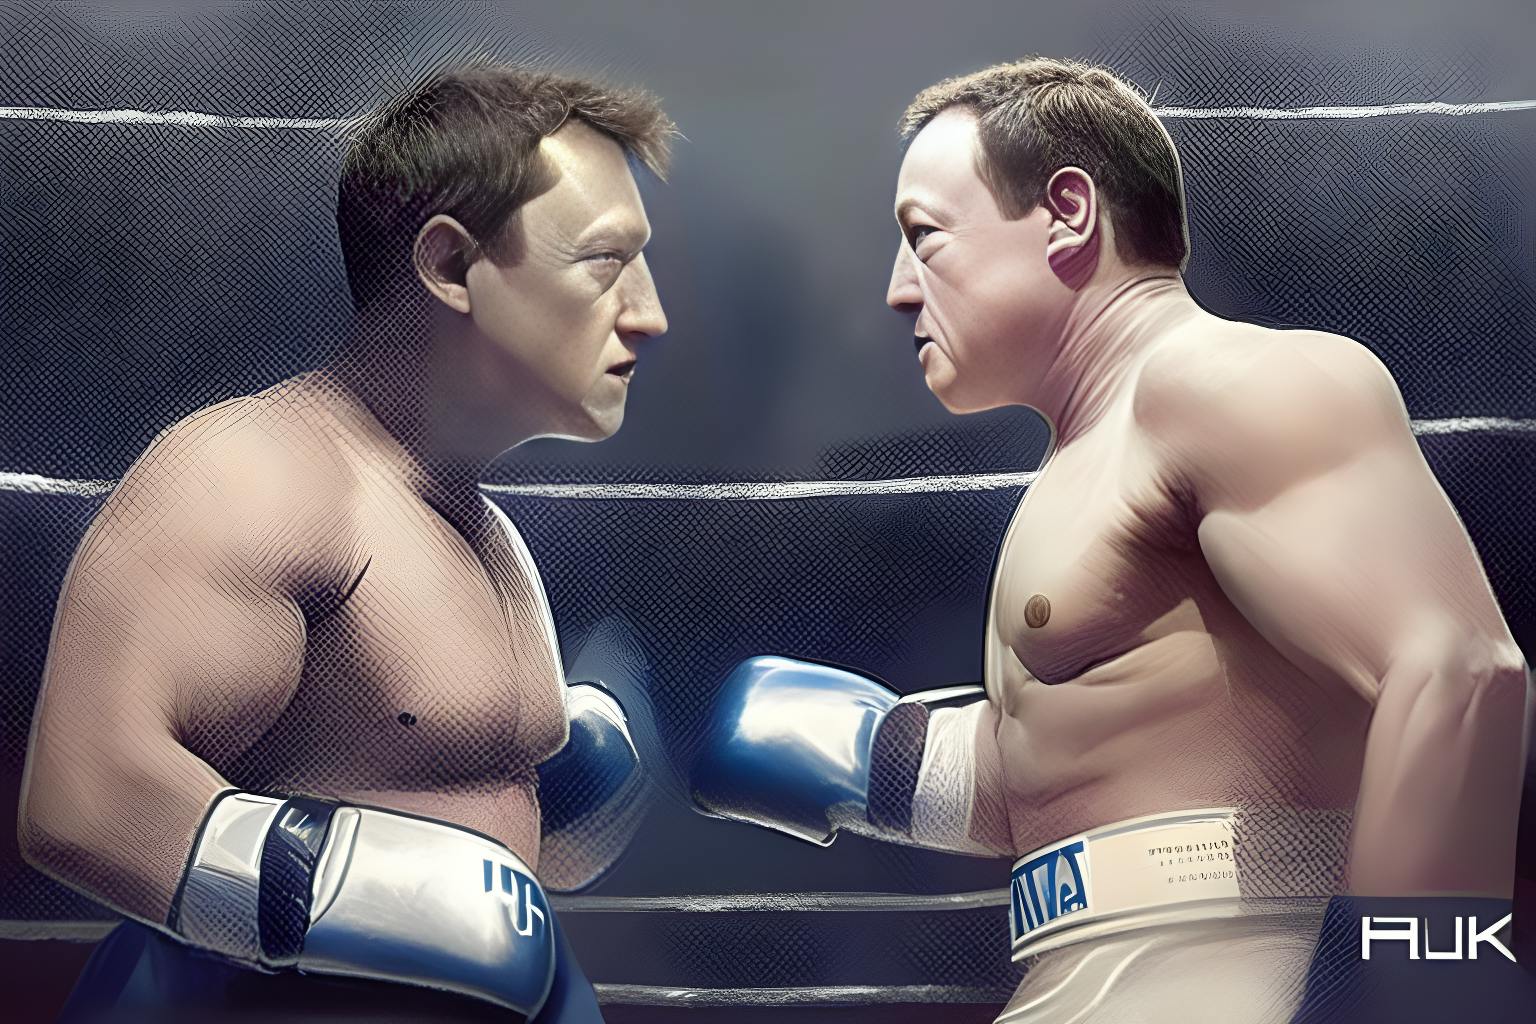 /zuck-vs-musk-who-will-win feature image